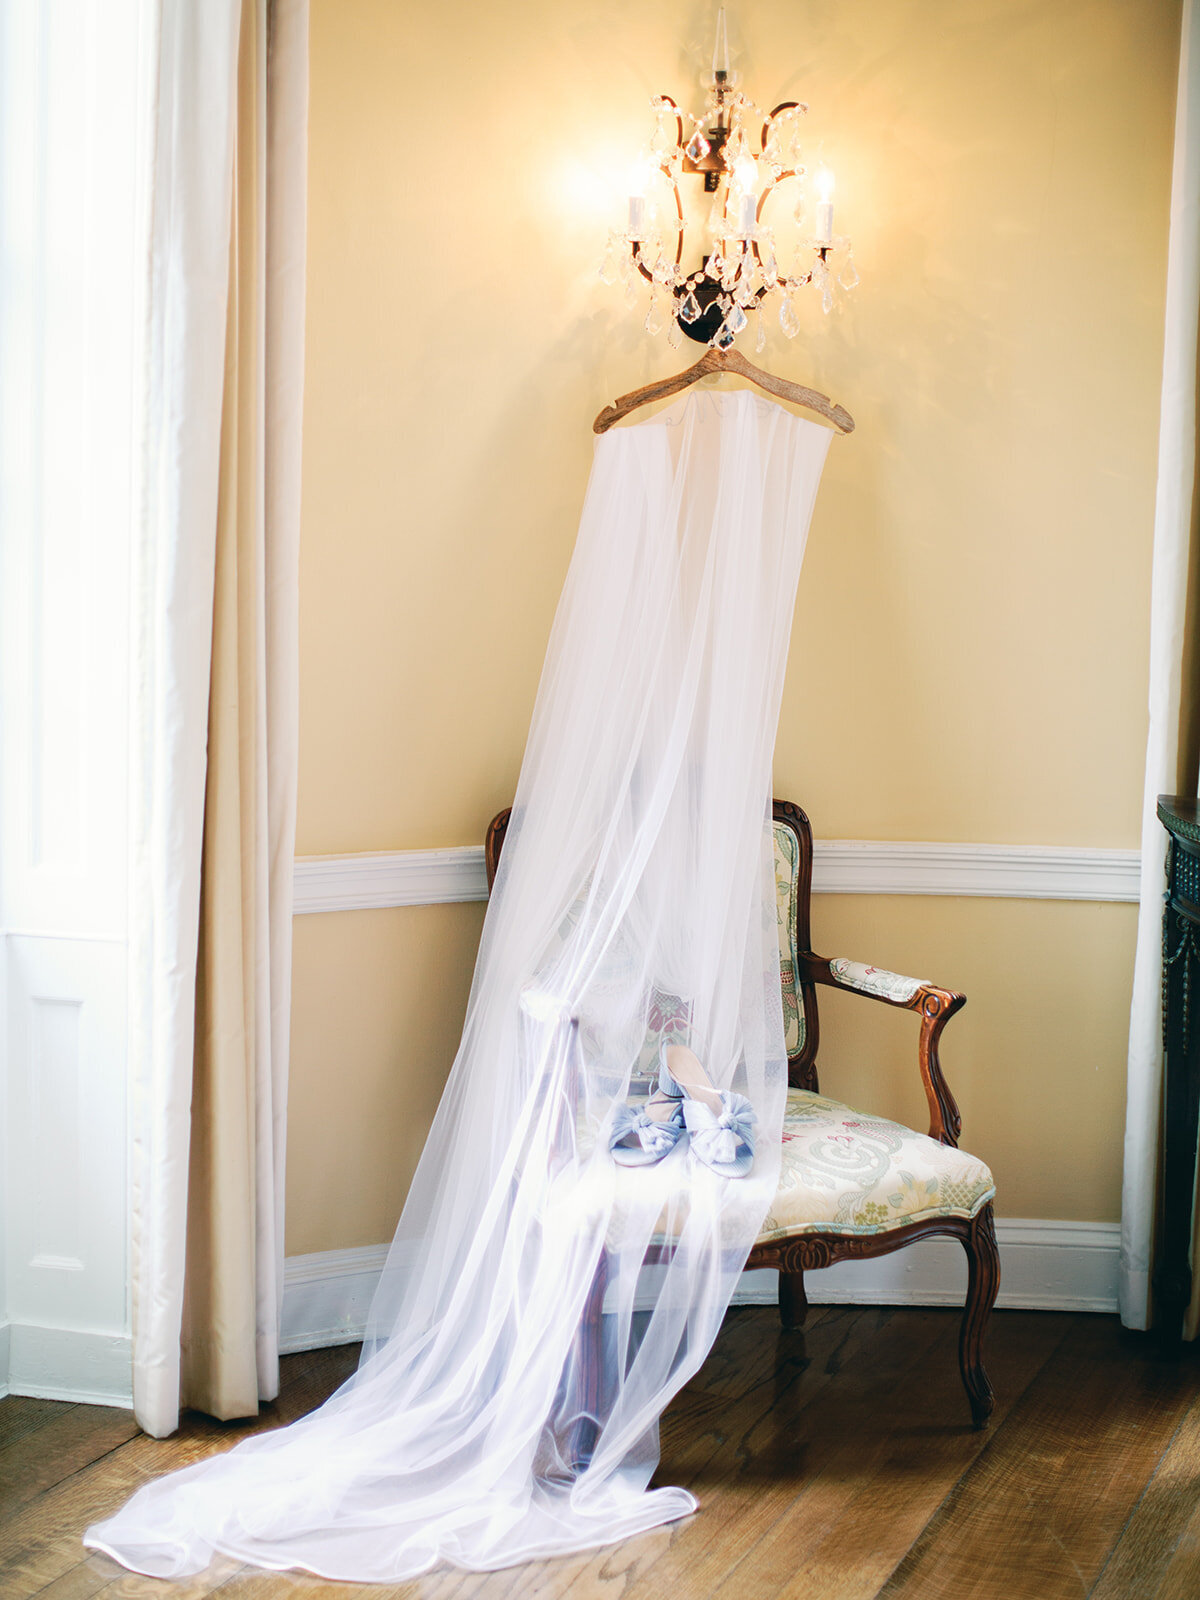 M+G_Belmont Manor_Morning_Luxury_Wedding_Photo_Clear Sky Images-9